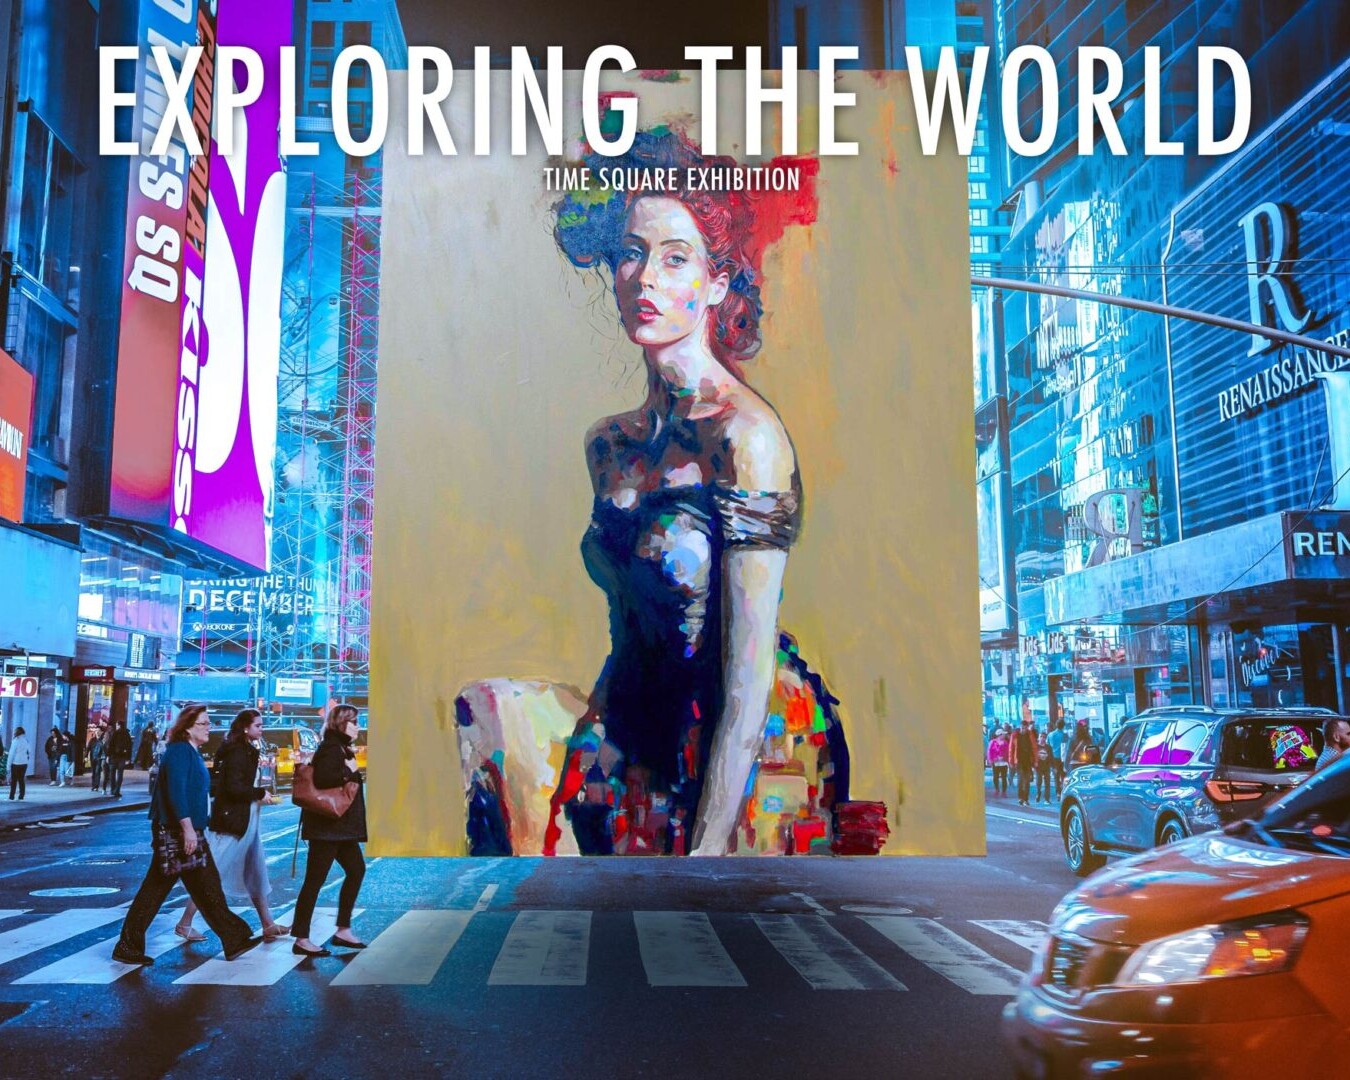 A vibrant and colorful artwork displayed on a large digital screen in the midst of Times Square.